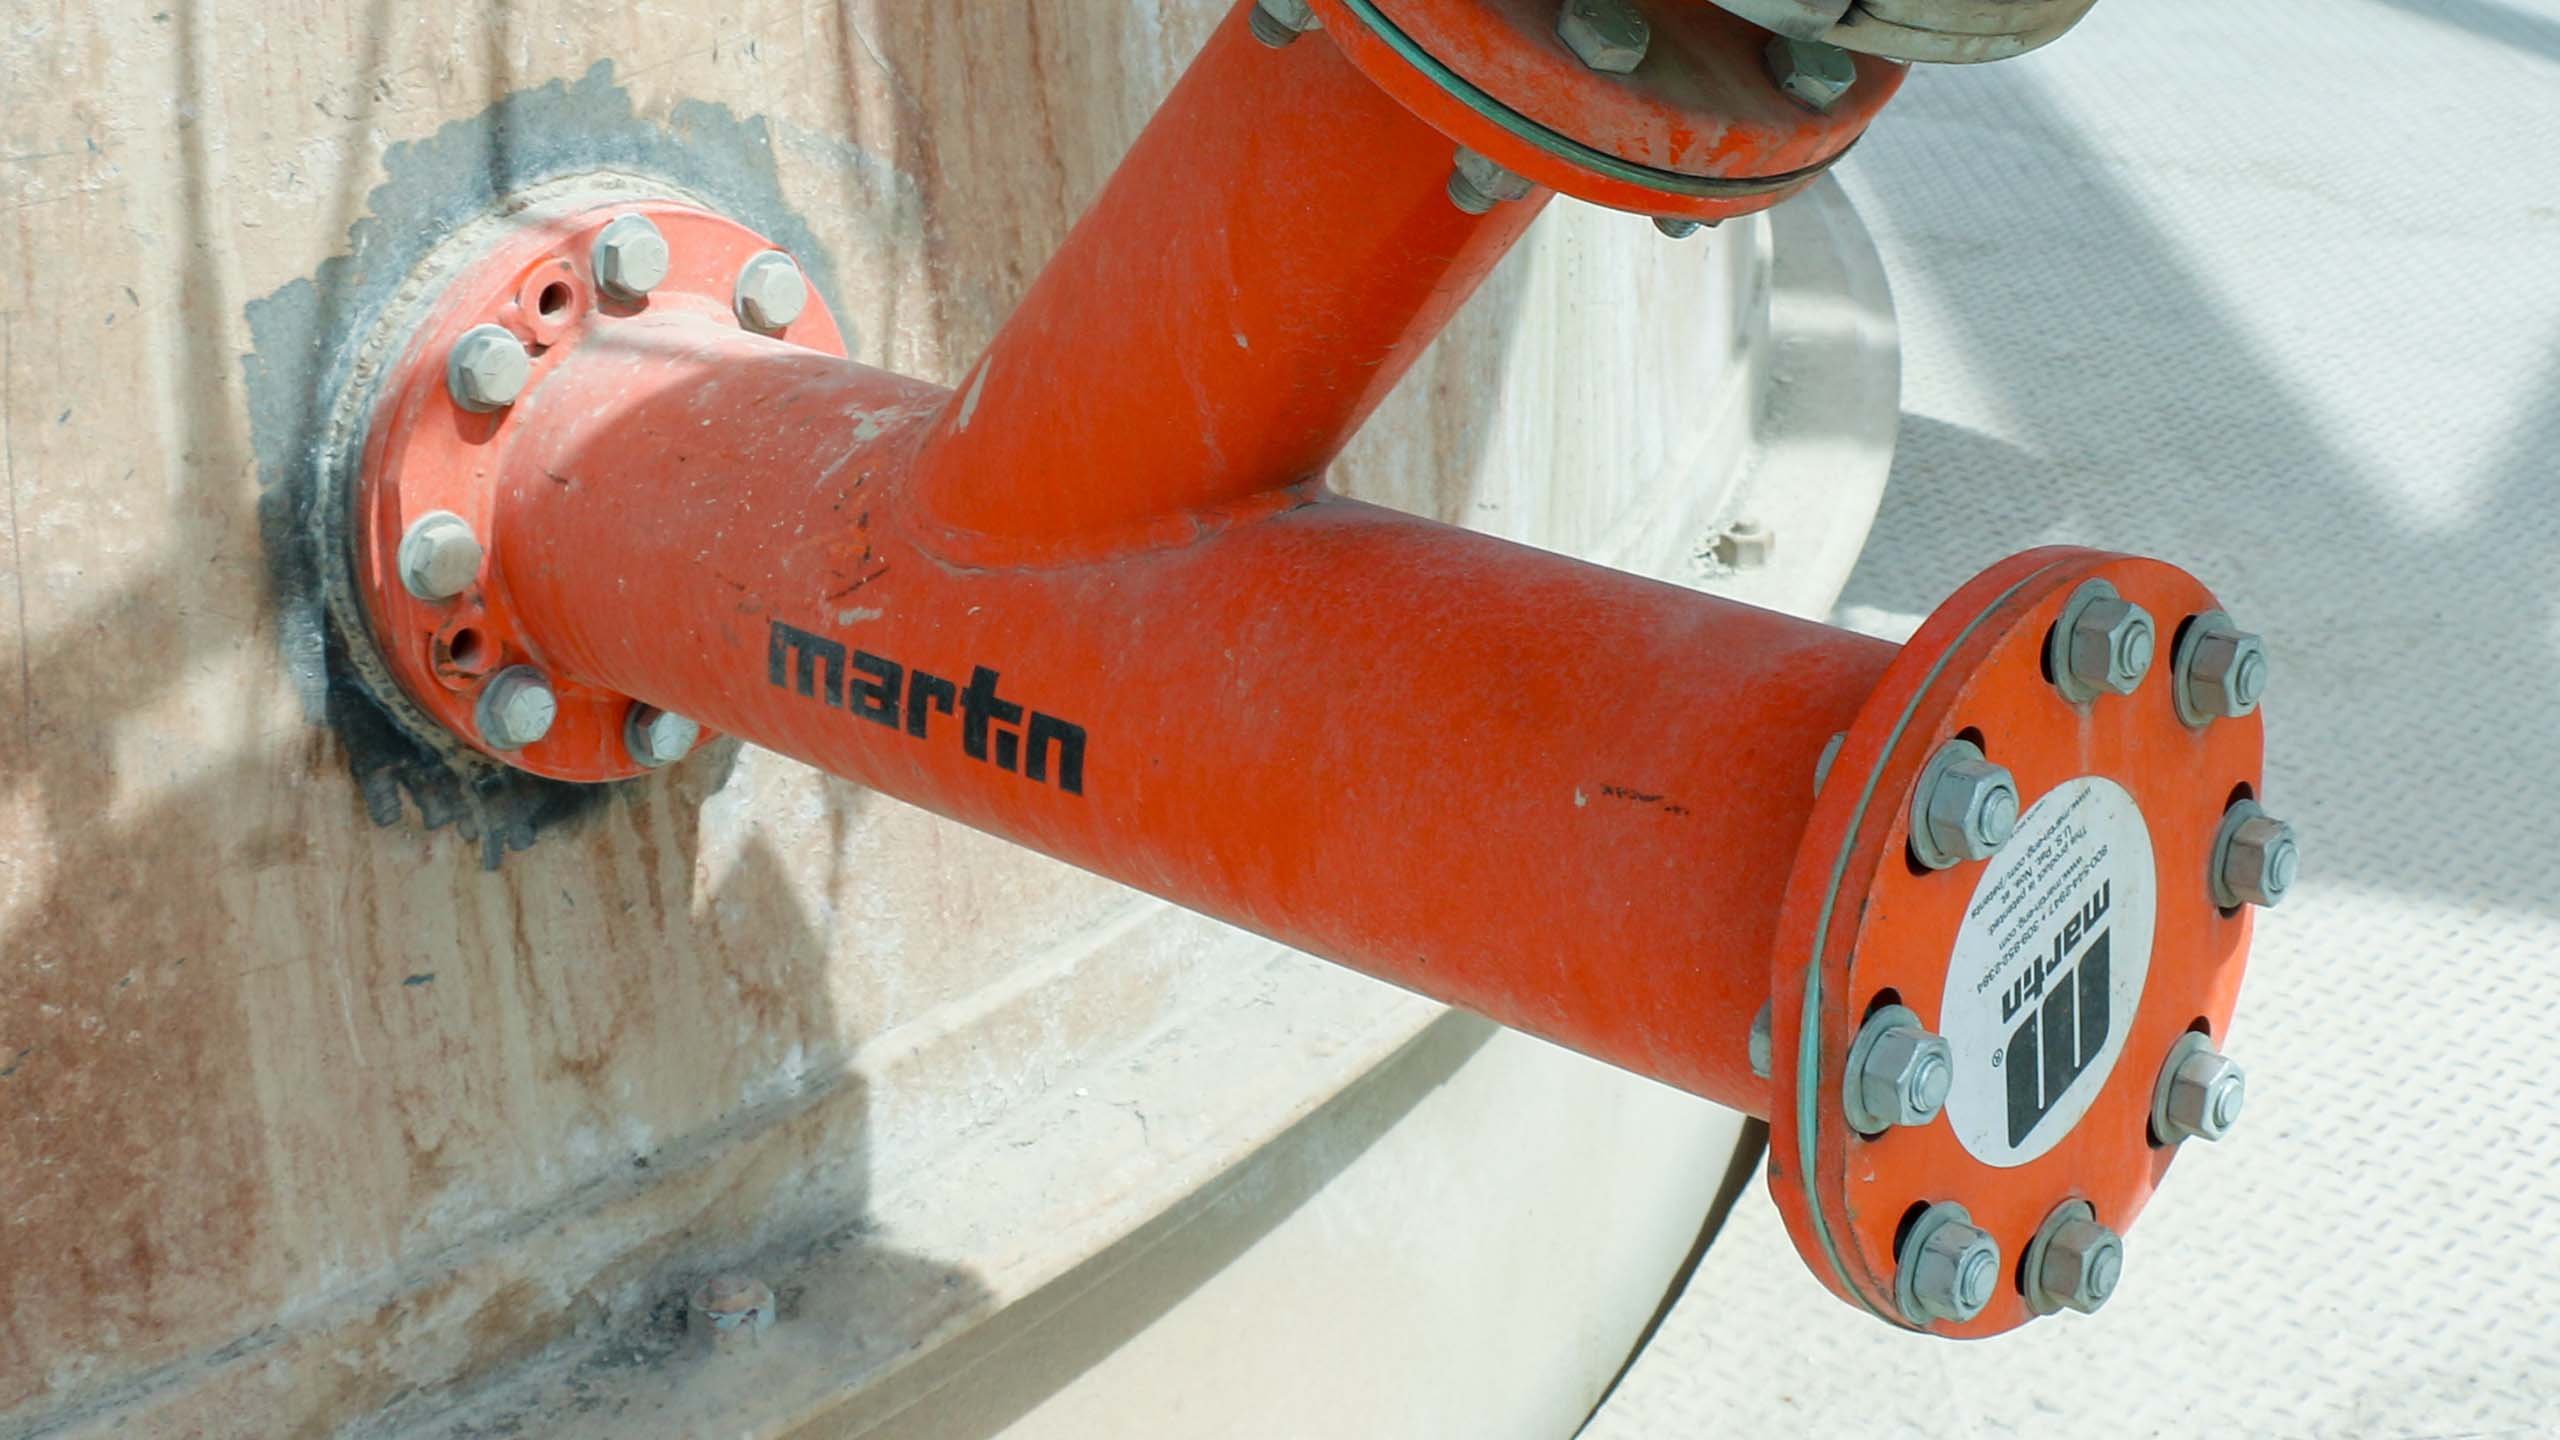 SMART Nozzle Y-Pipe installed on a tower at a cement plant.